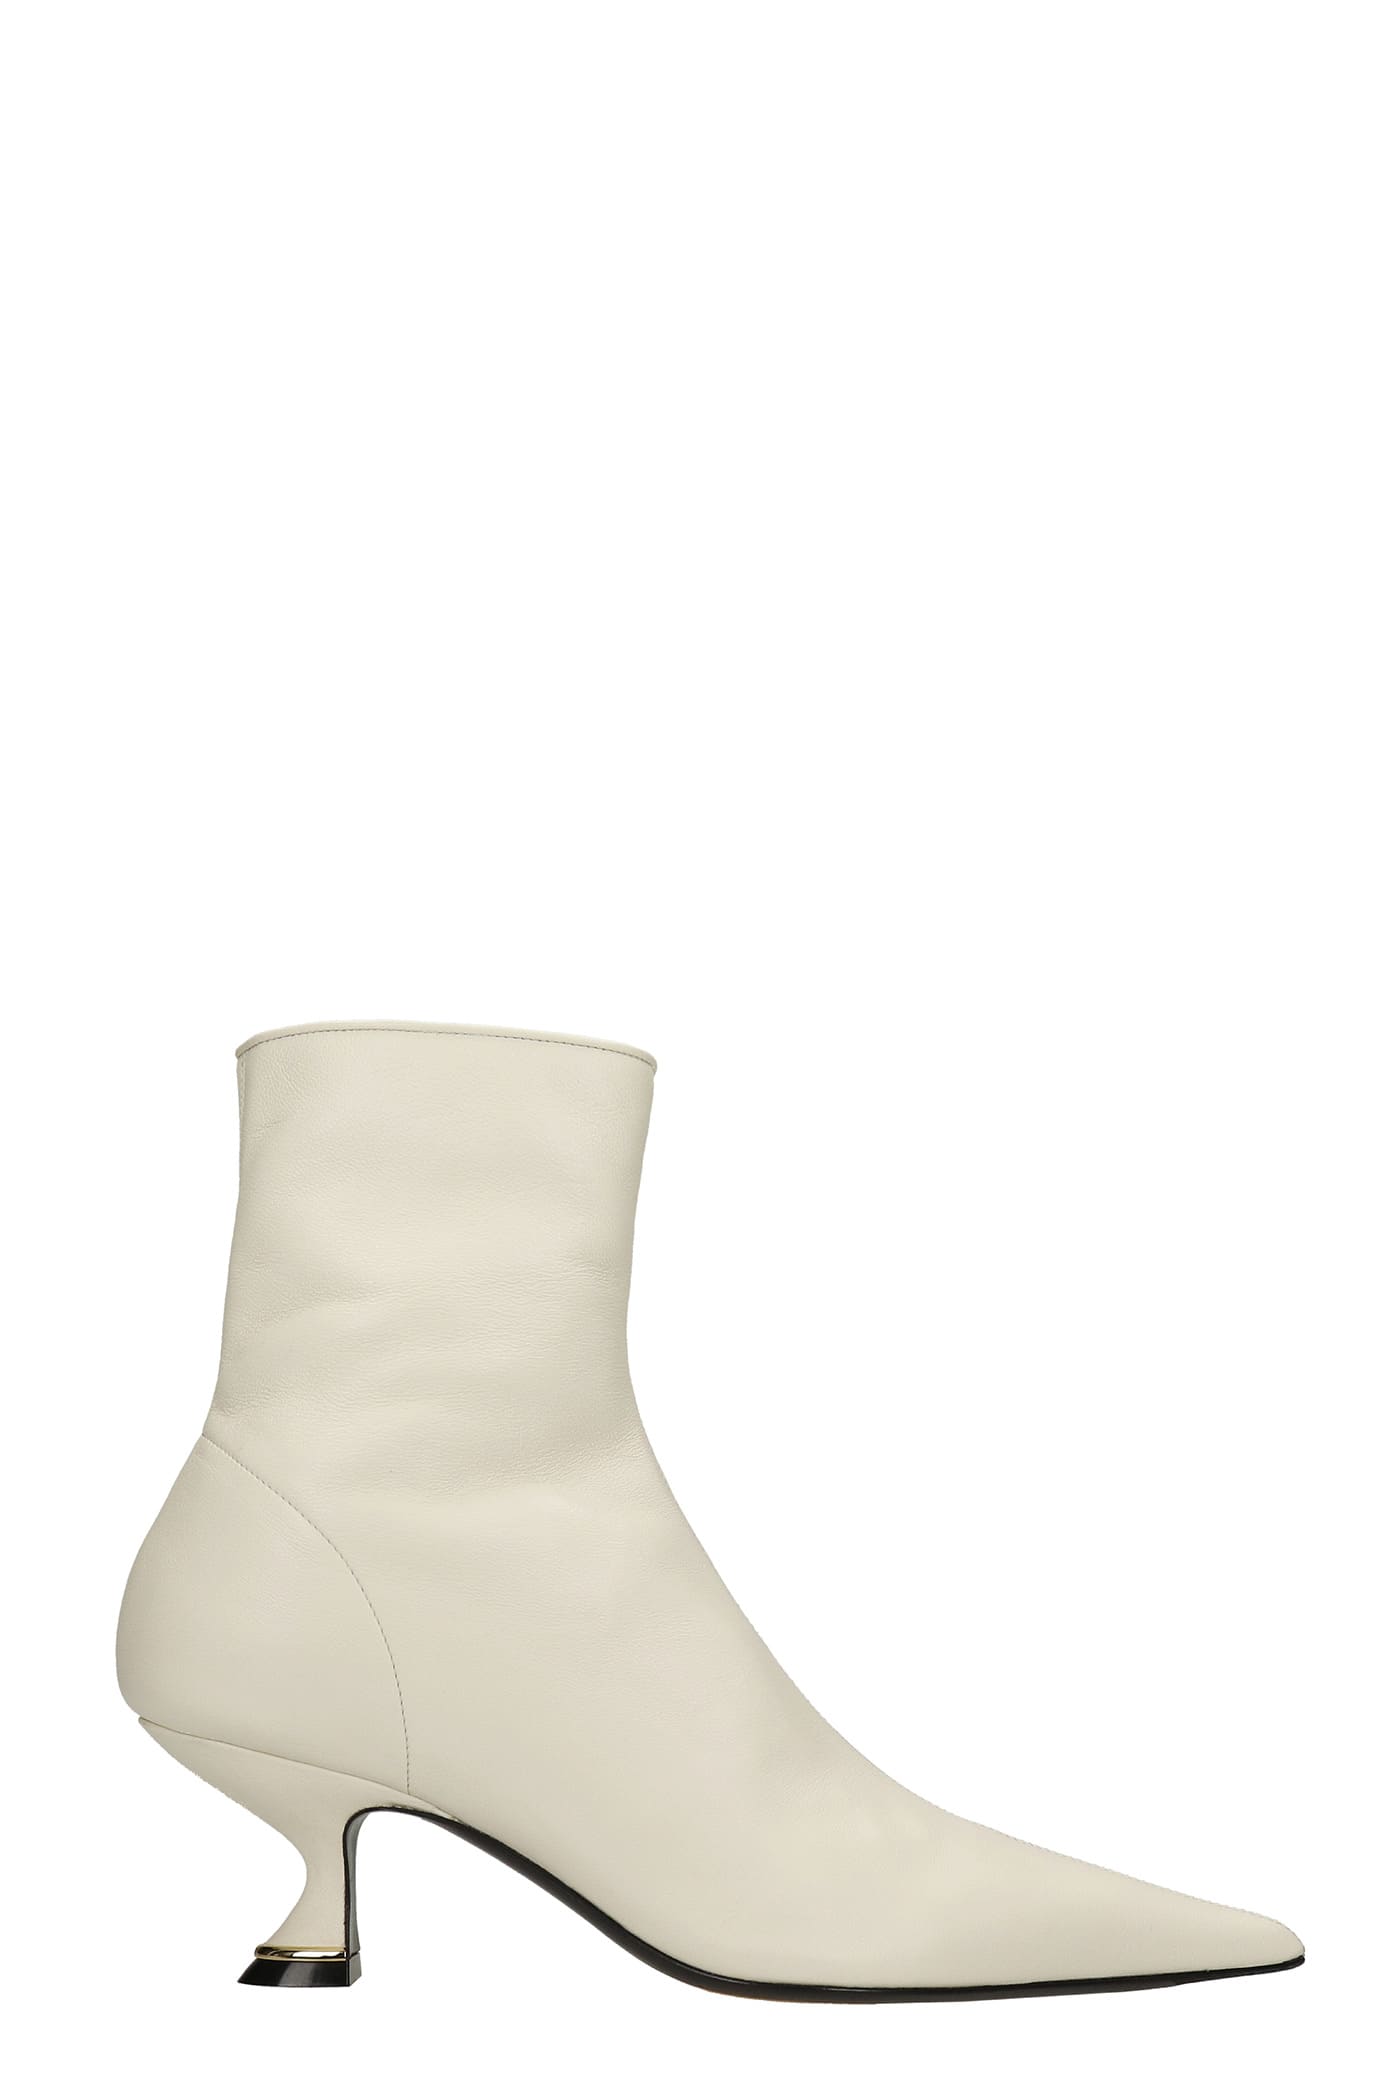 Lanvin Rita High Heels Ankle Boots In White Leather